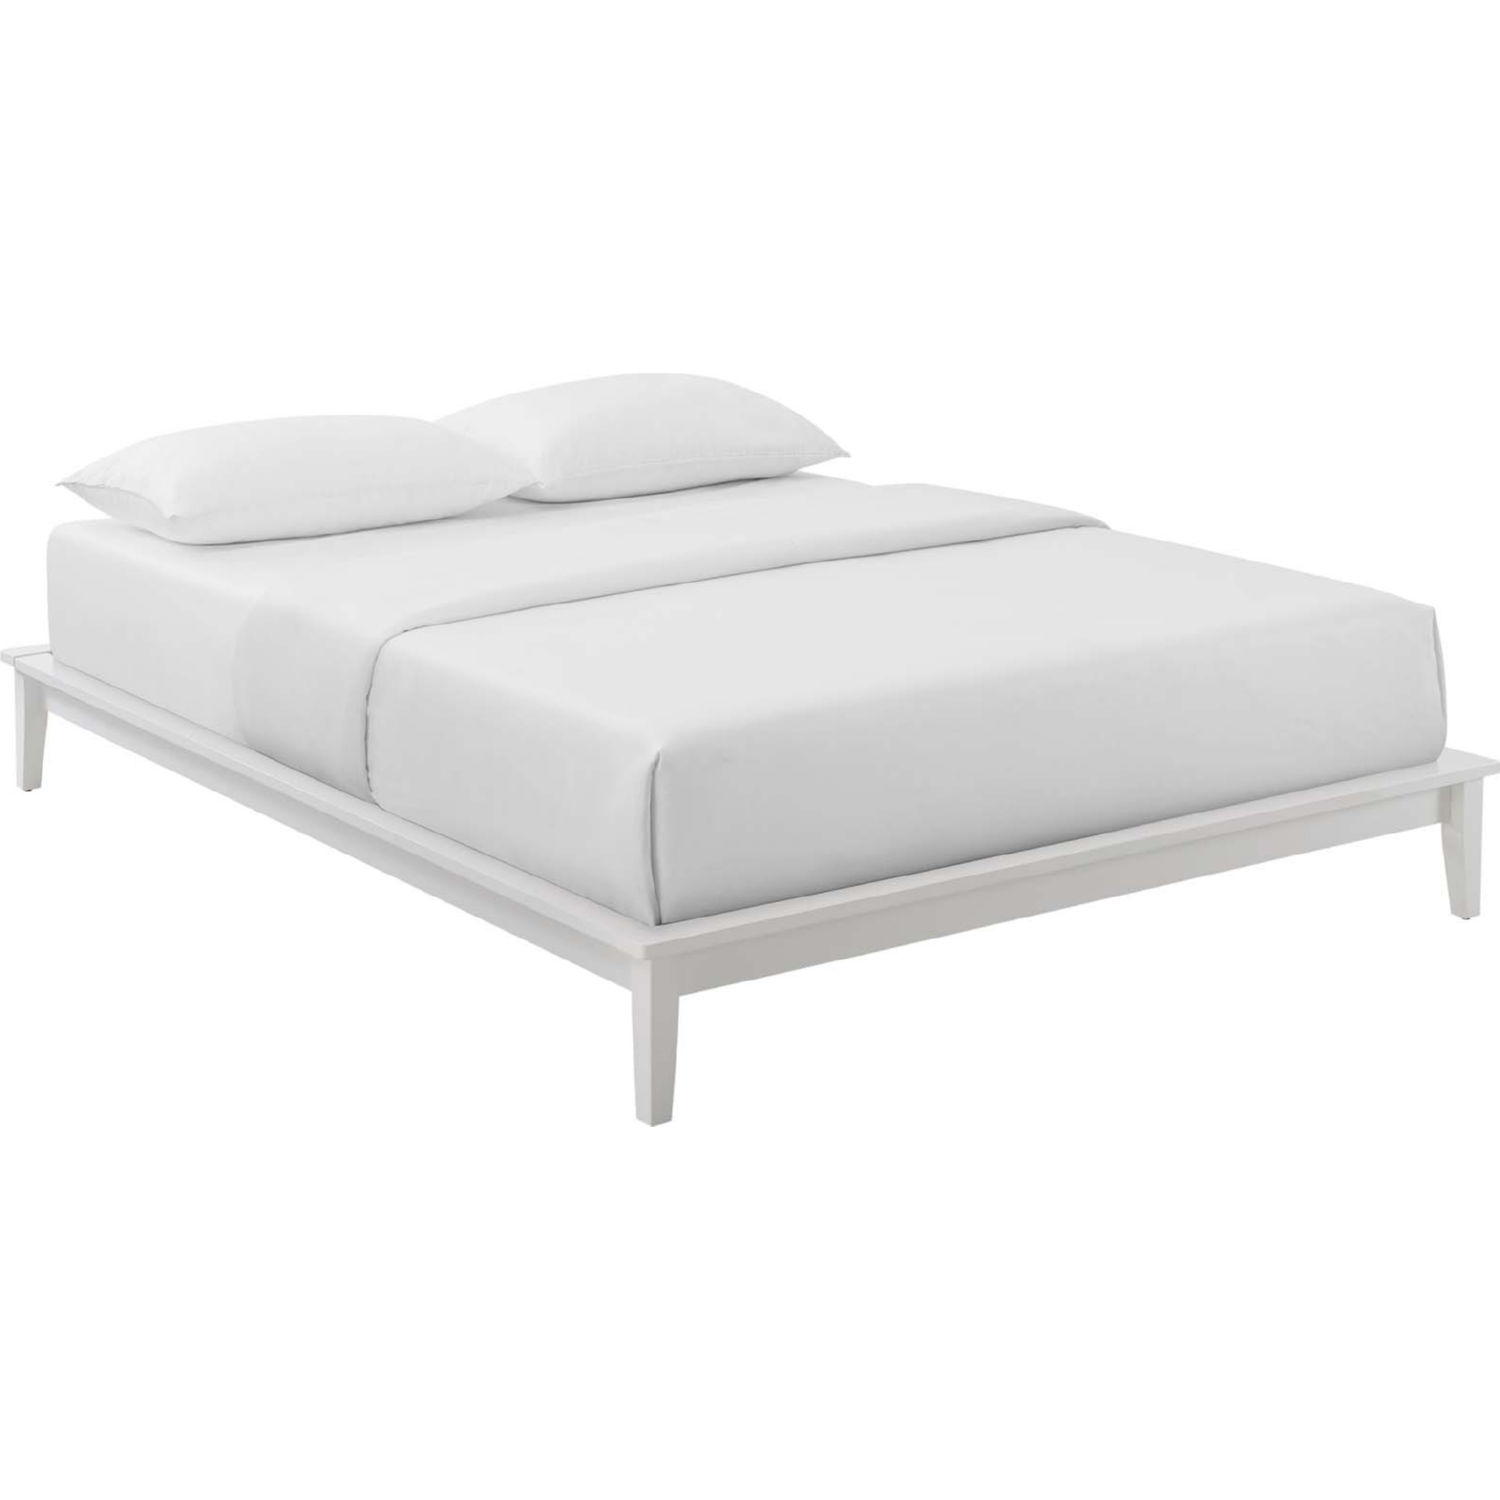 Modway Mod 6055 Whi Lodge Queen, Platform Bed Frame Queen White Wooden